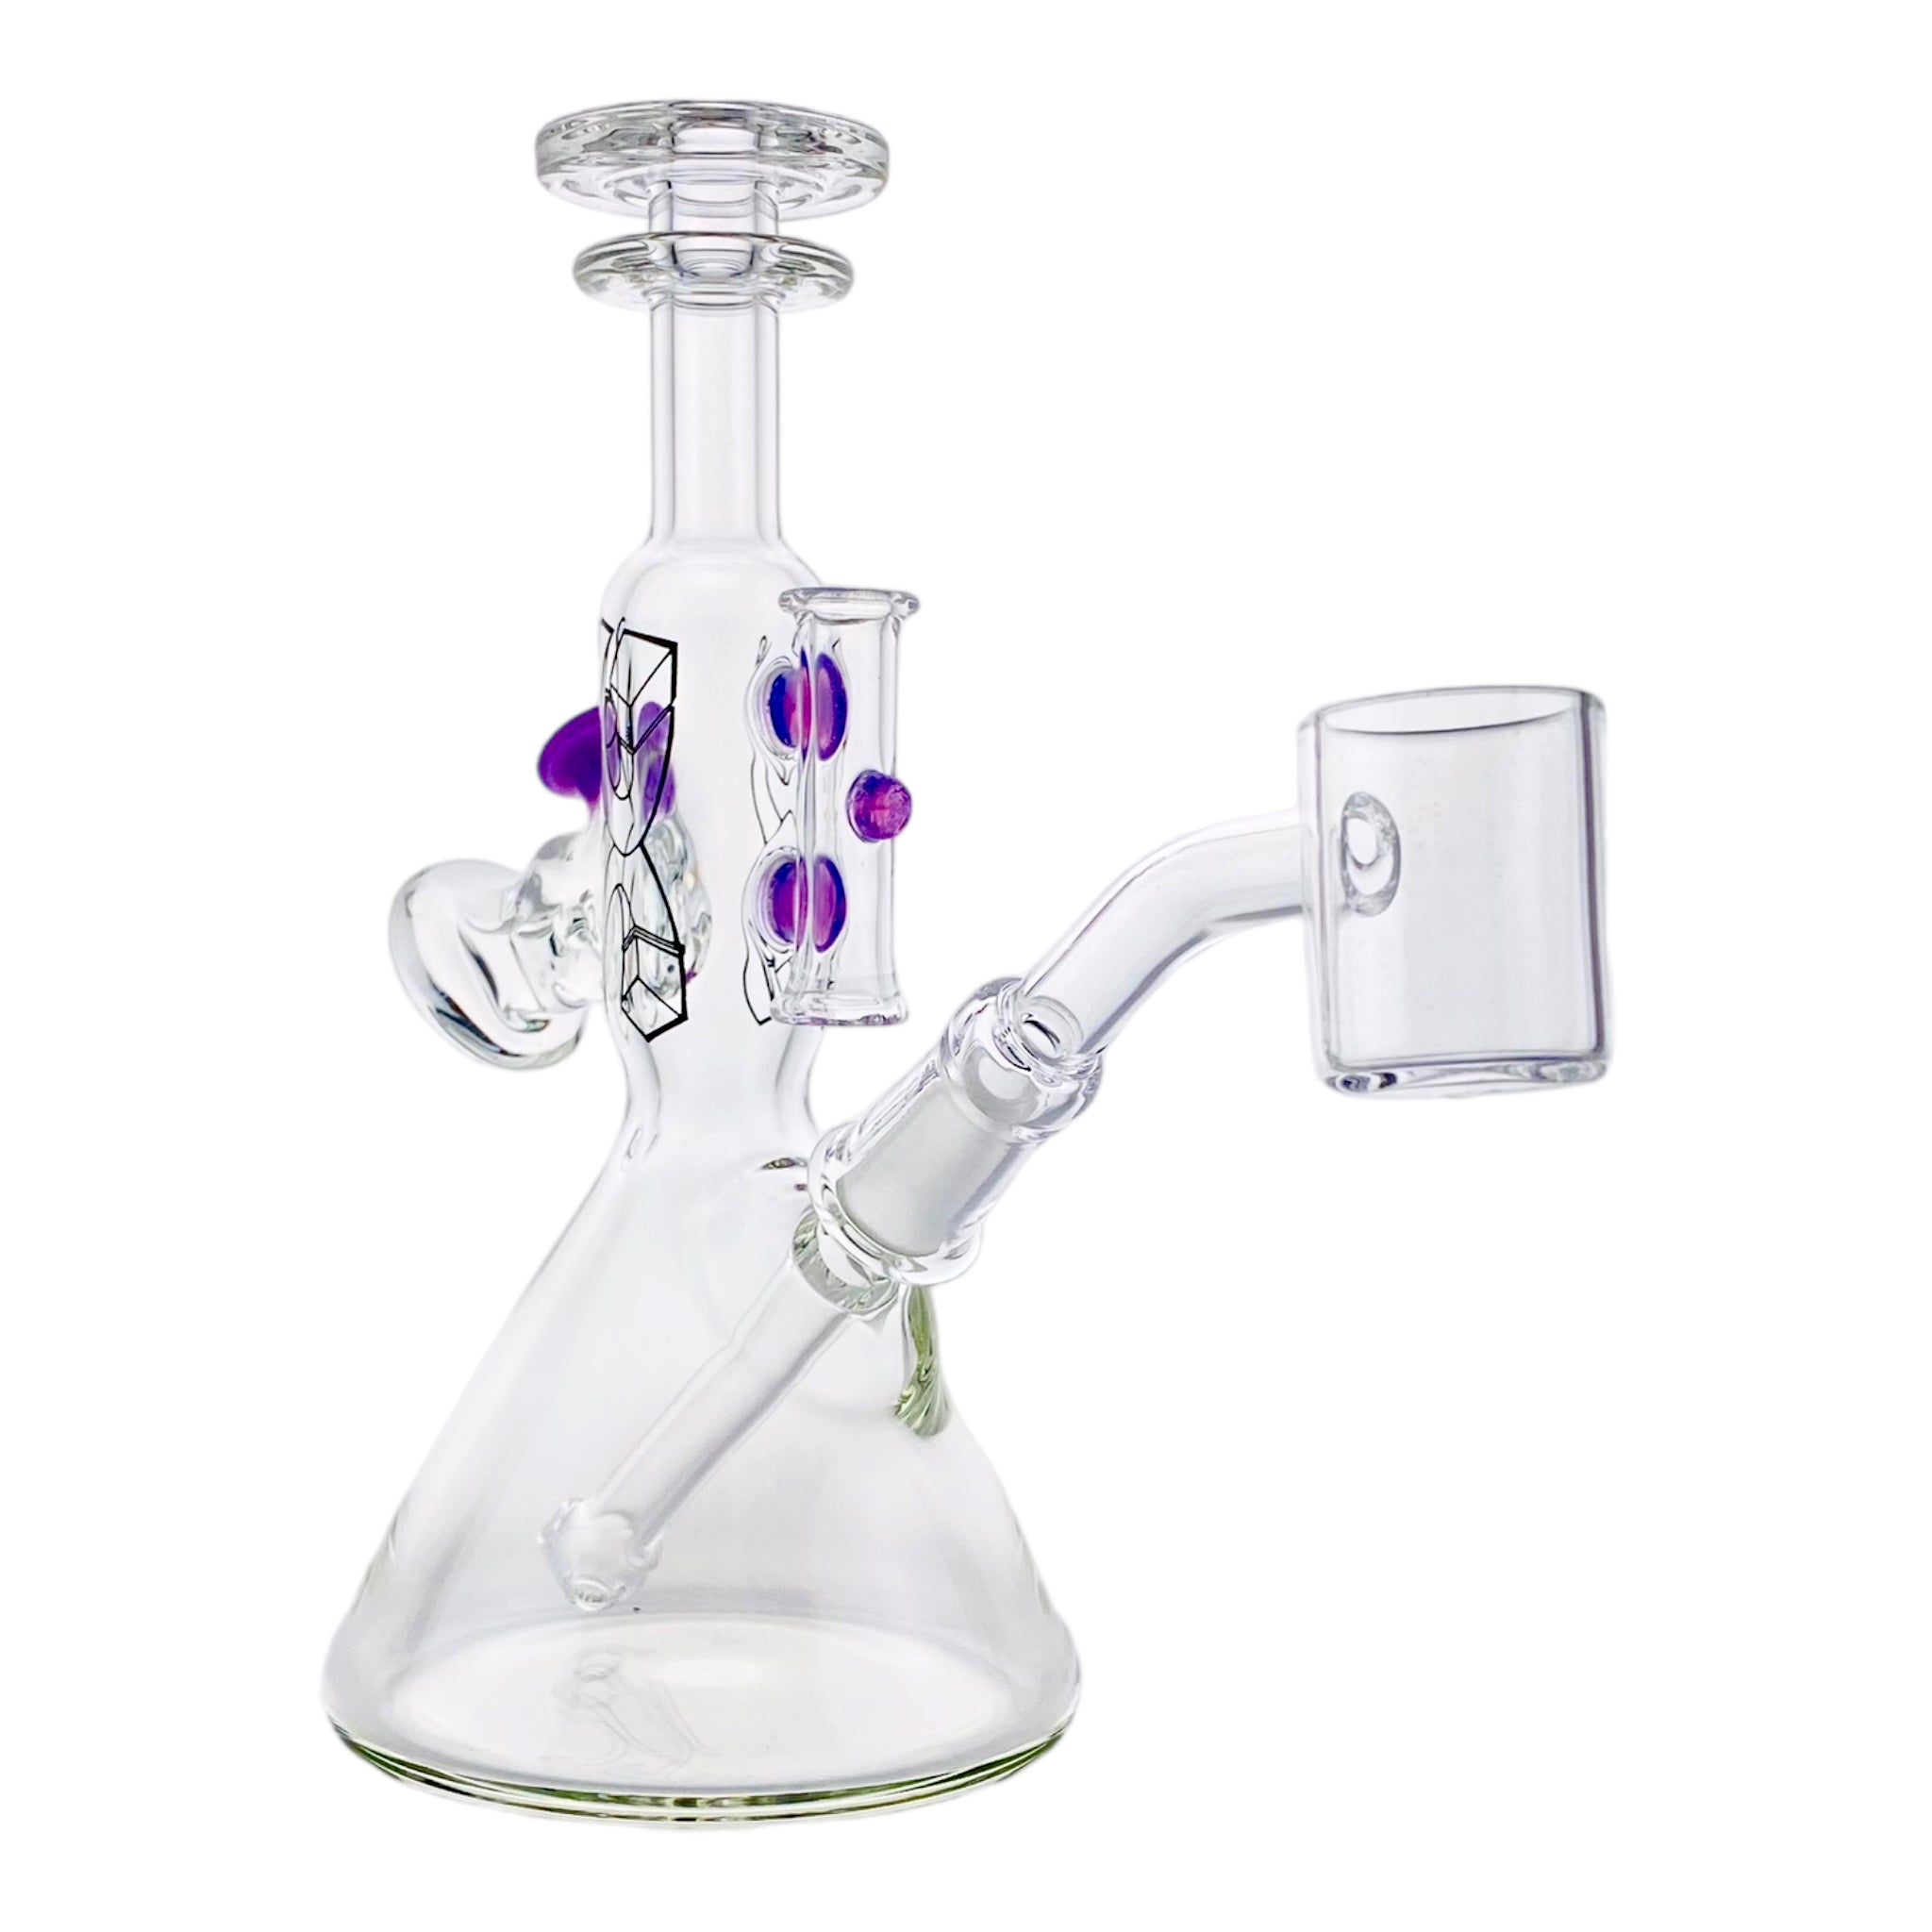 Darby Creations - Small Clear Ray Gun Dab Rig